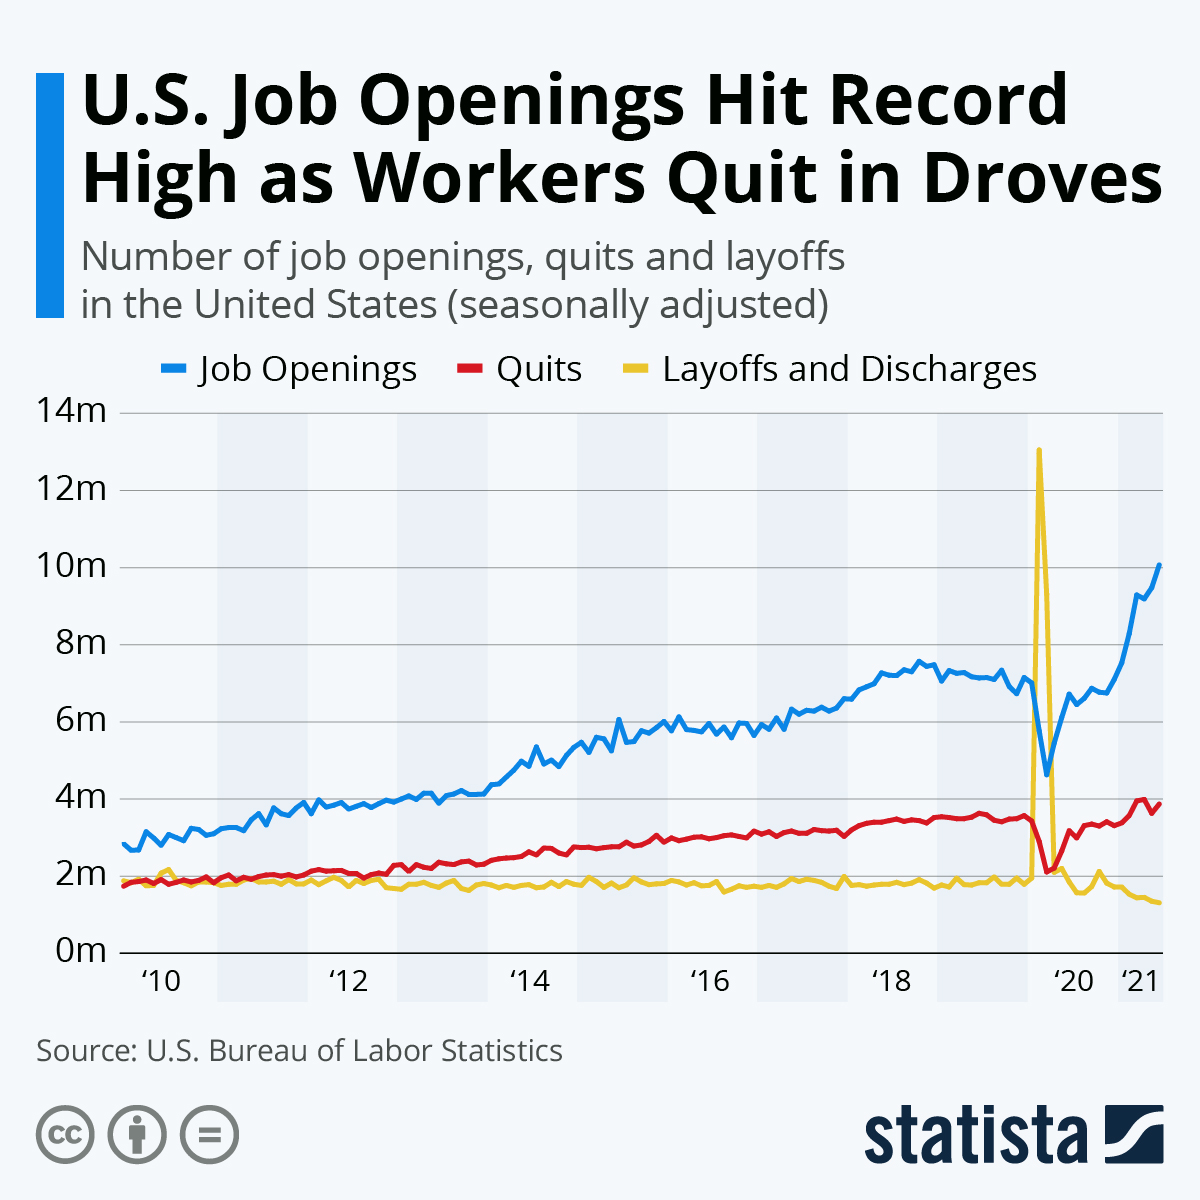 U.S. Job Openings Hit Record High as Workers Quit in Droves